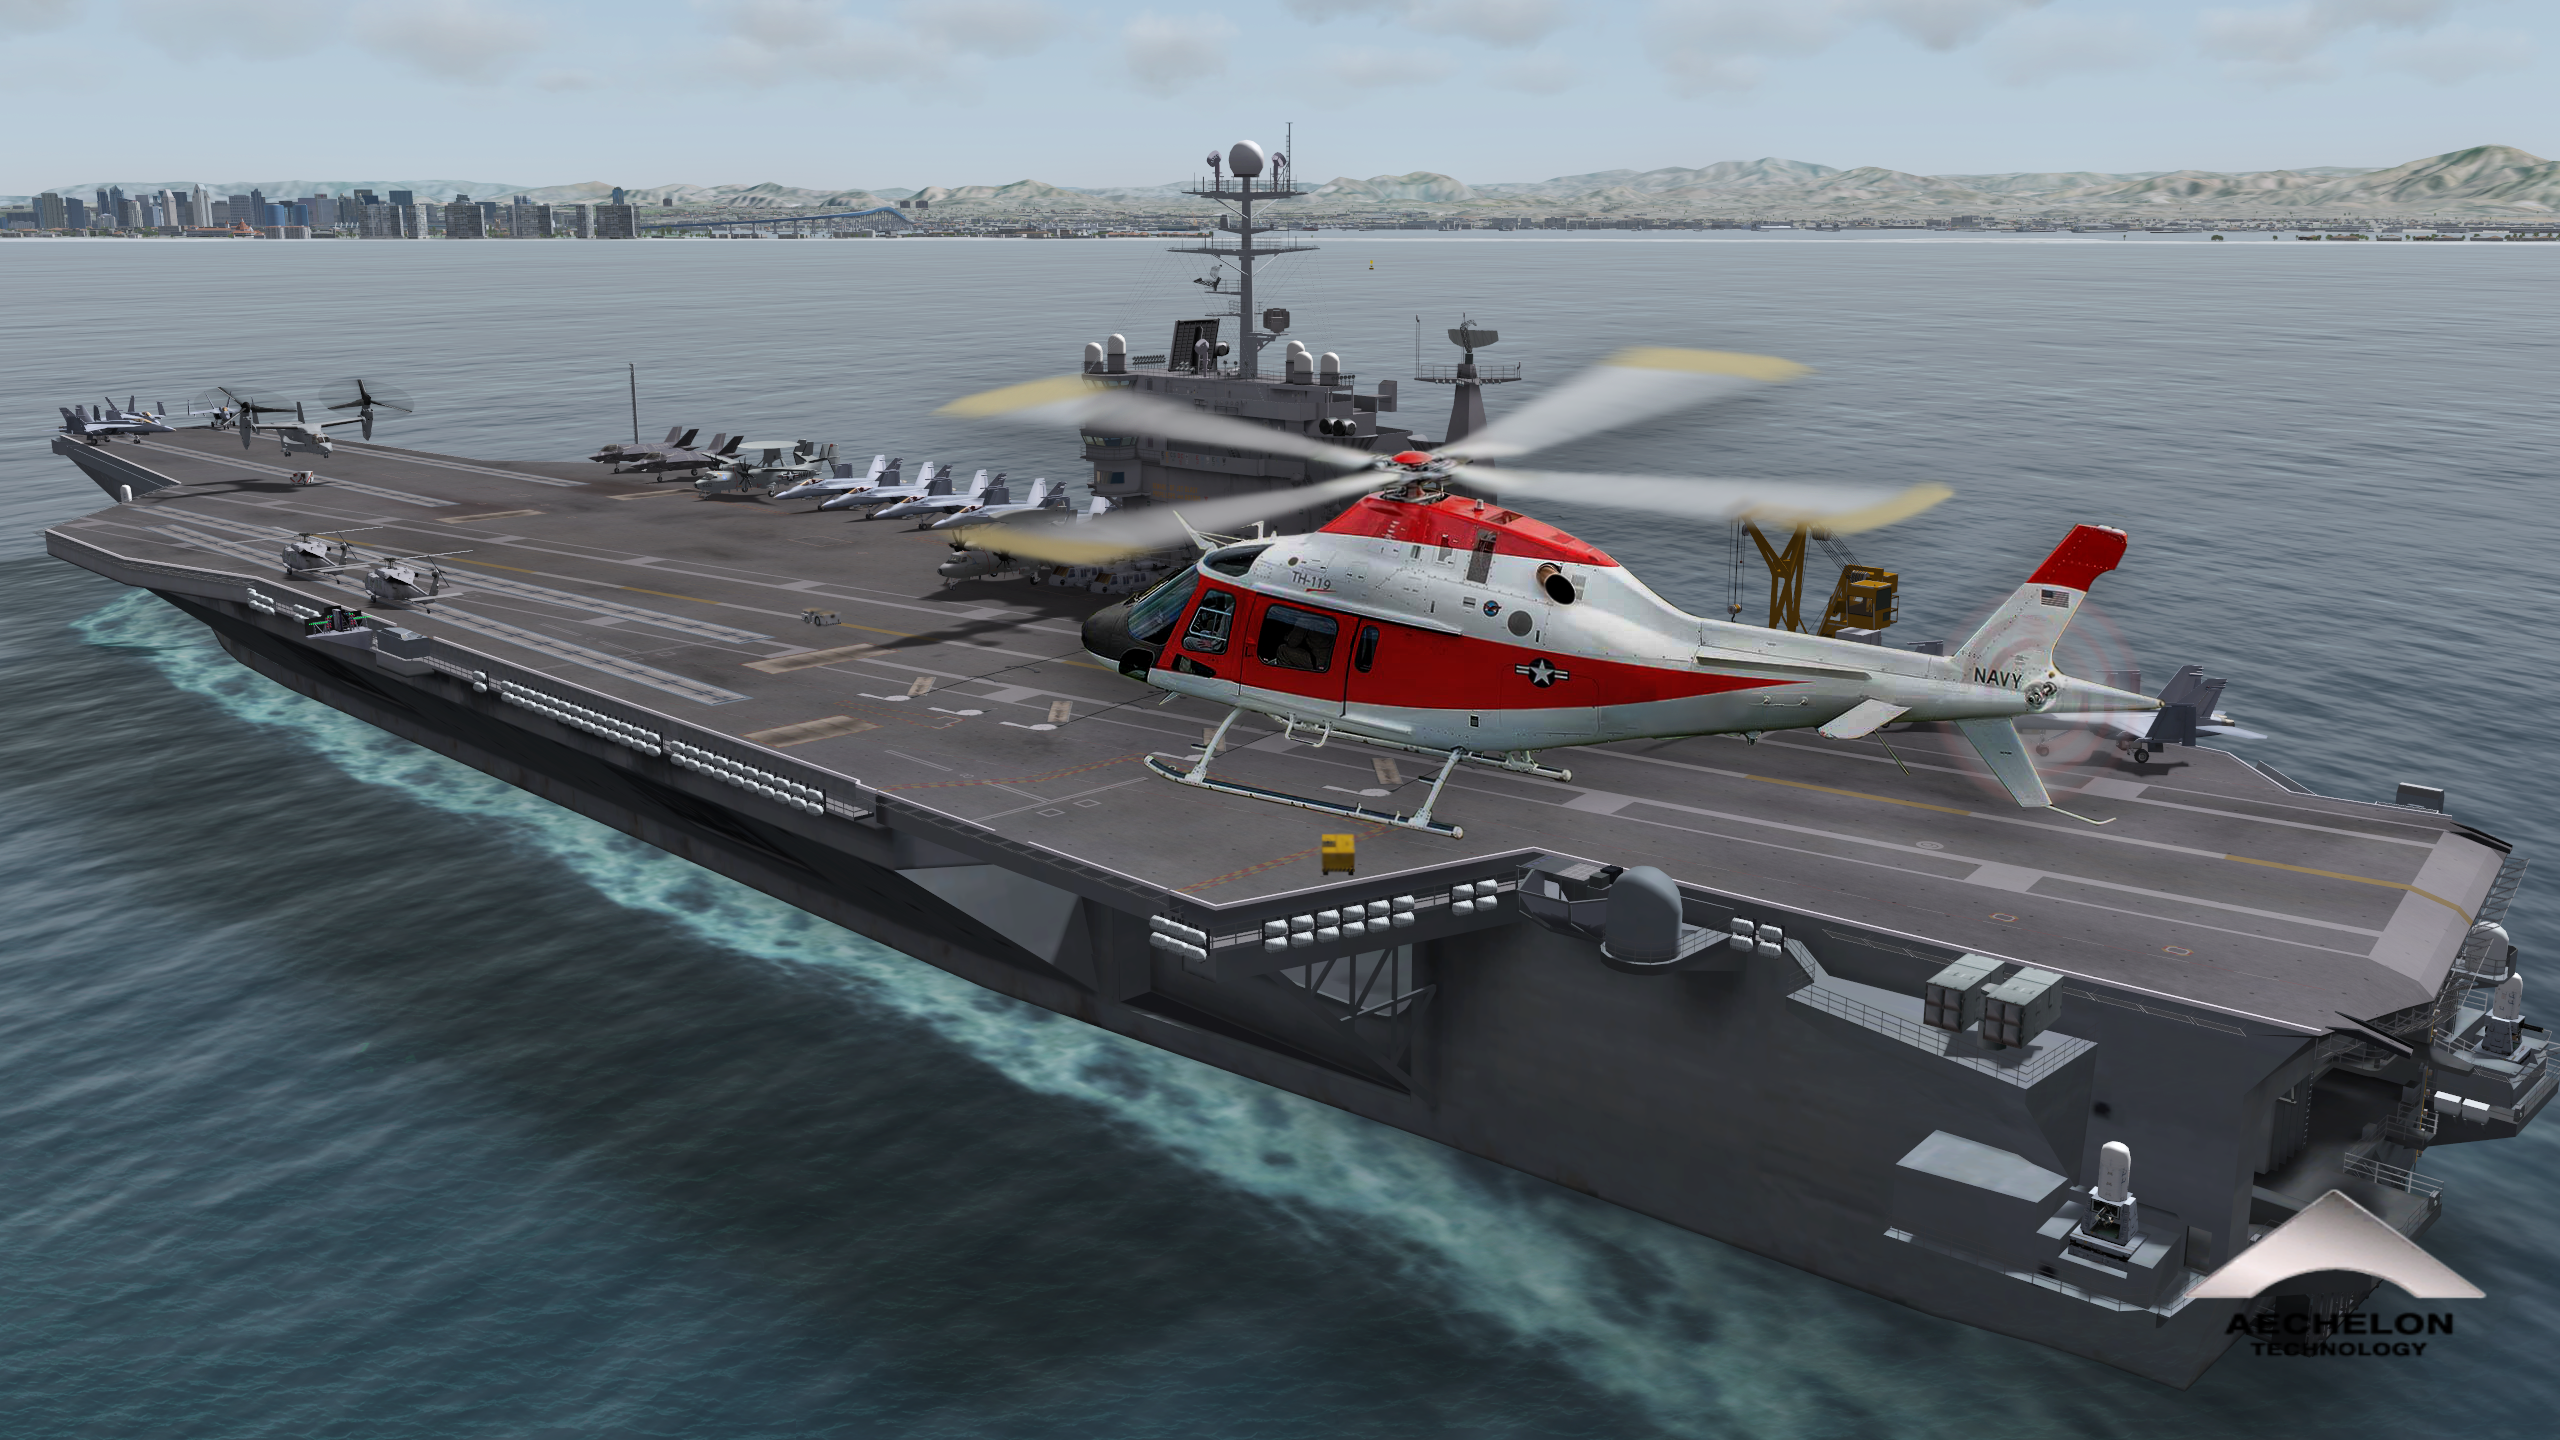 Helicopter preparing for landing on a docking ship